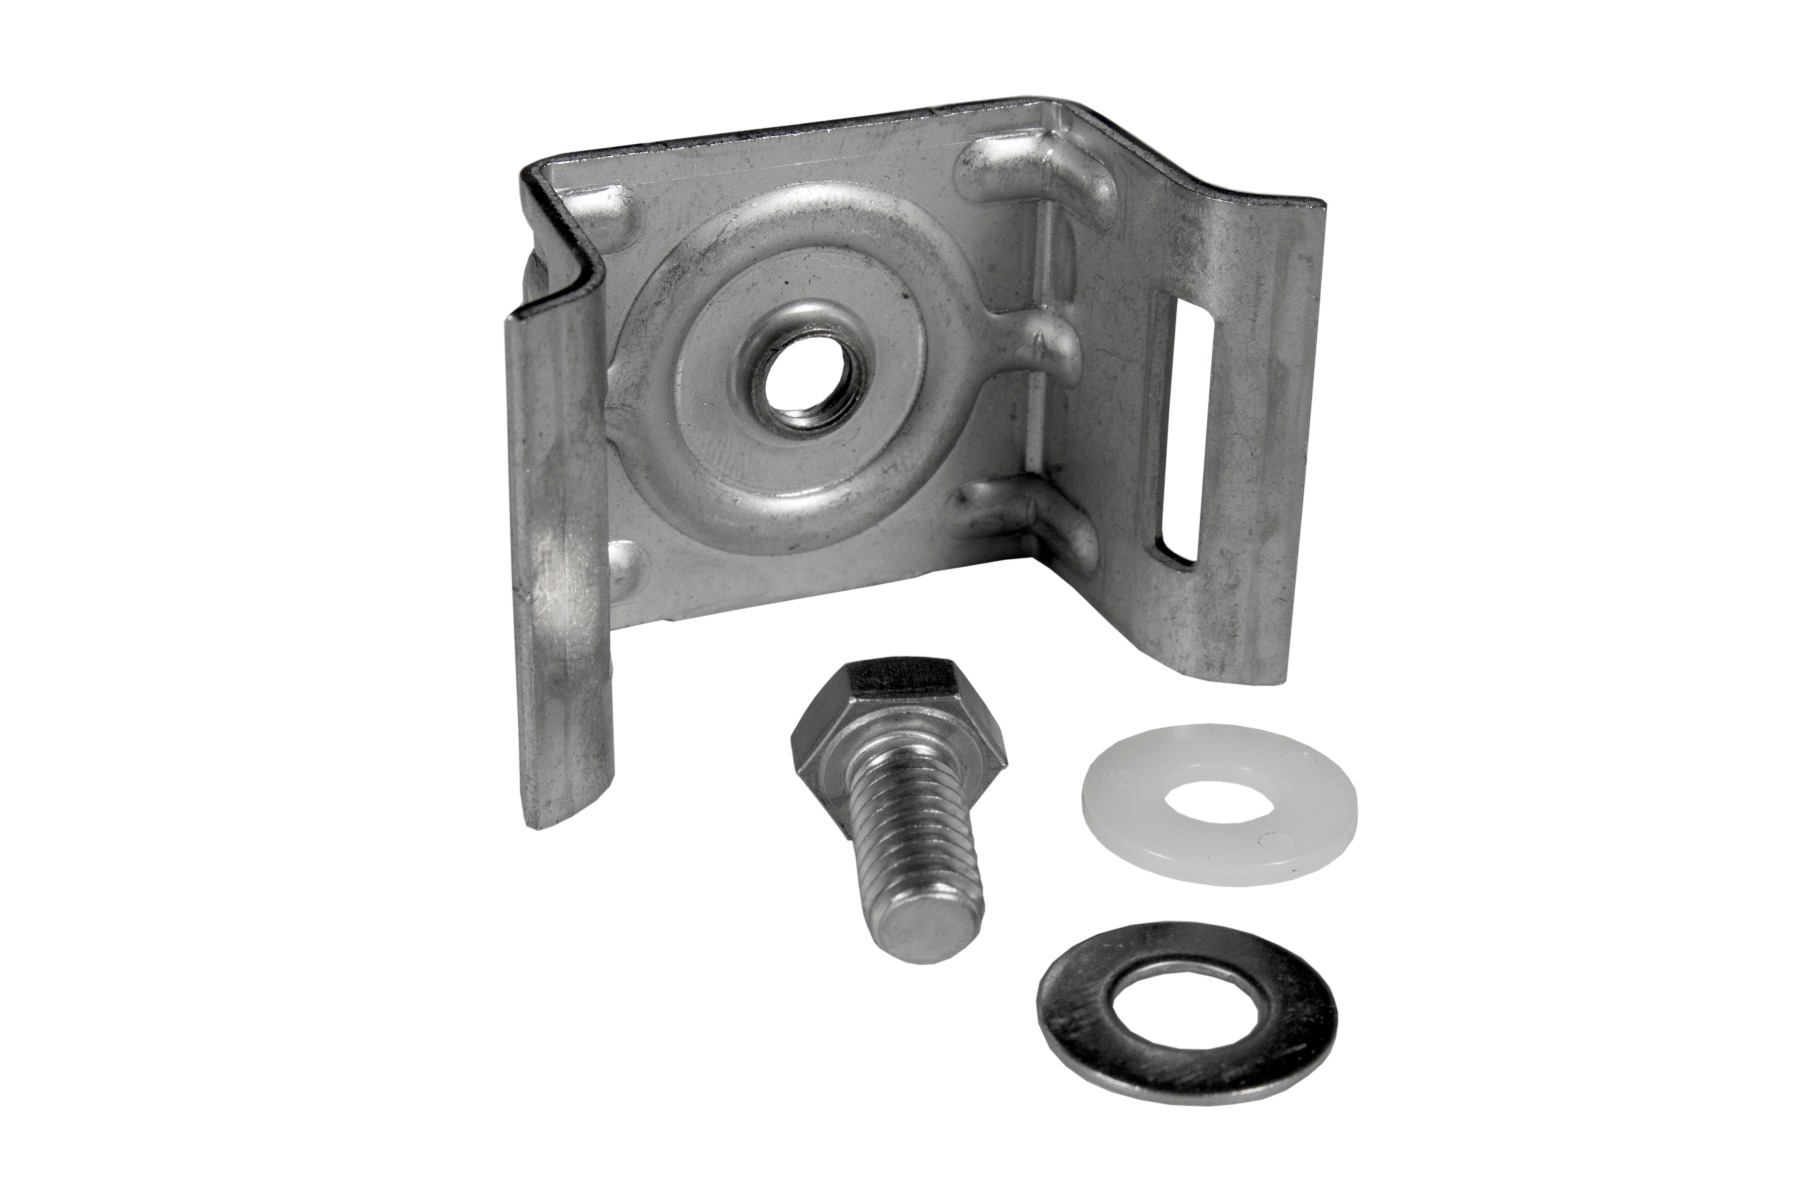 Flared Leg Sign Bracket with SS Bolt and Washer from GME Supply